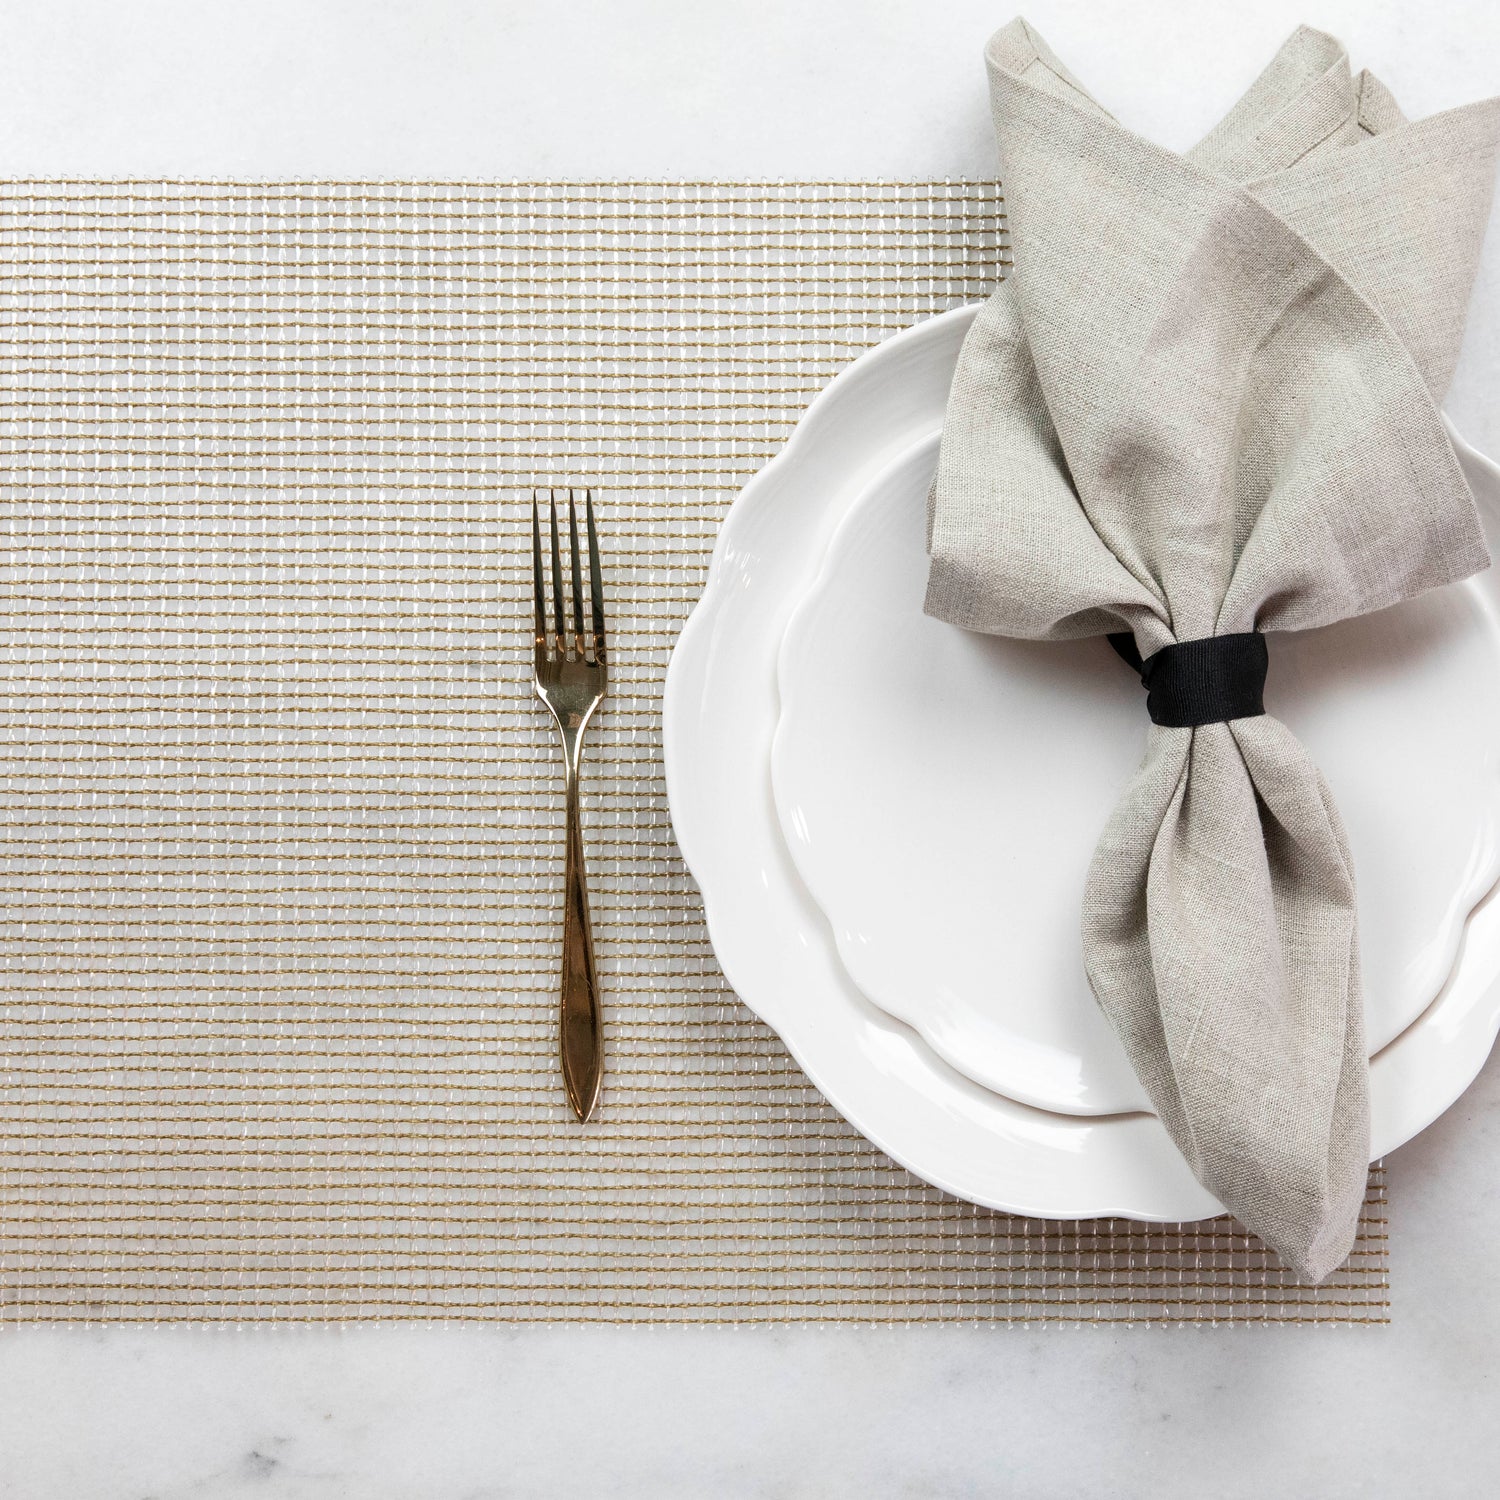 A neatly arranged table setting with a plate, folded napkin, and a fork on a Chilewich Lattice Table Mat.